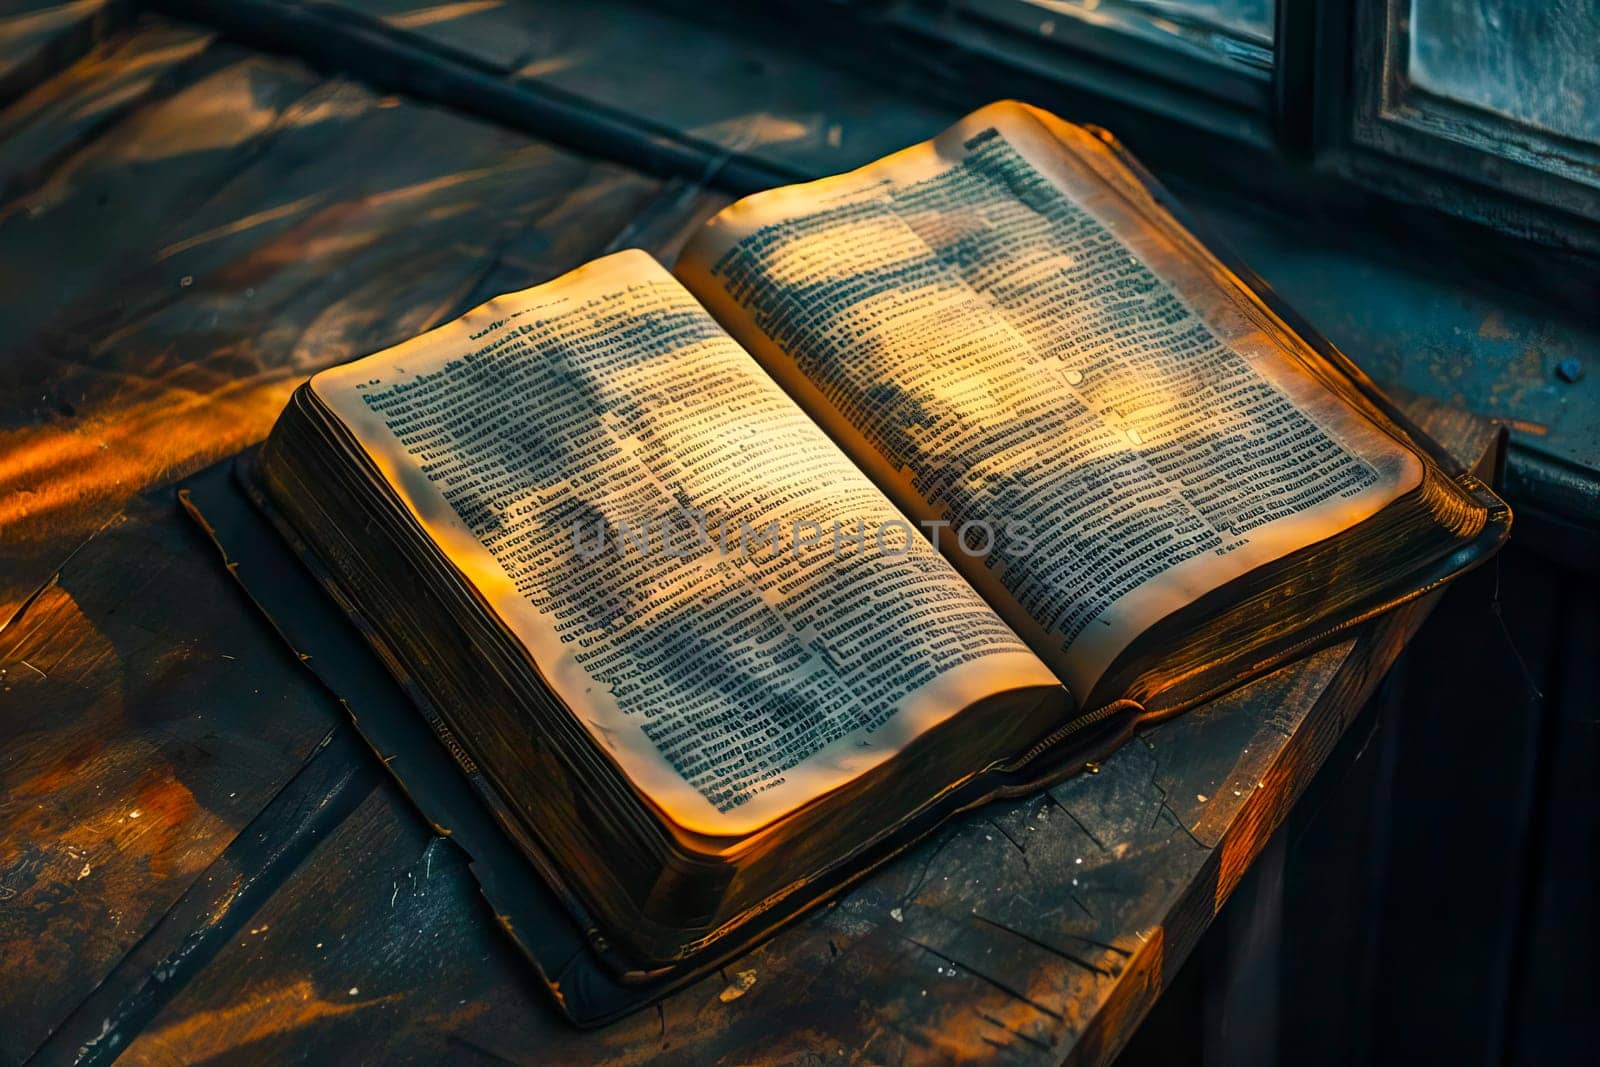 An open Holy Bible rests on a wooden table in a well-lit room.